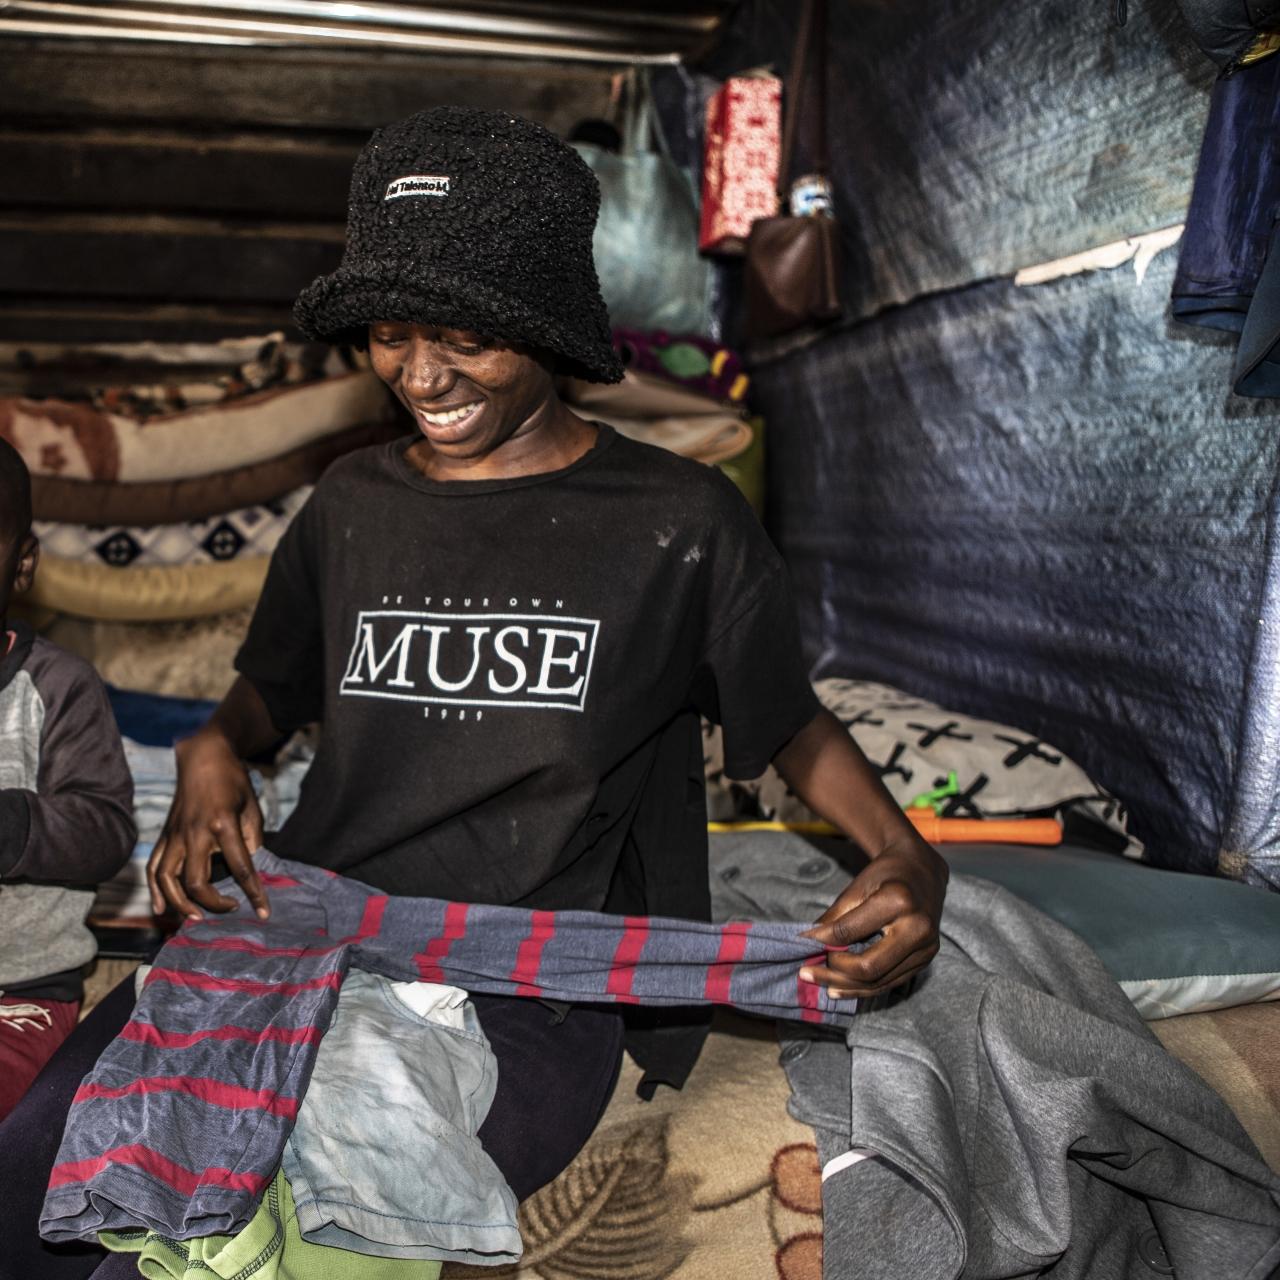 Winnie, a young women in a black bucket hat and black t-shirt sits next to young boy (her son) on a bed, folding clothes